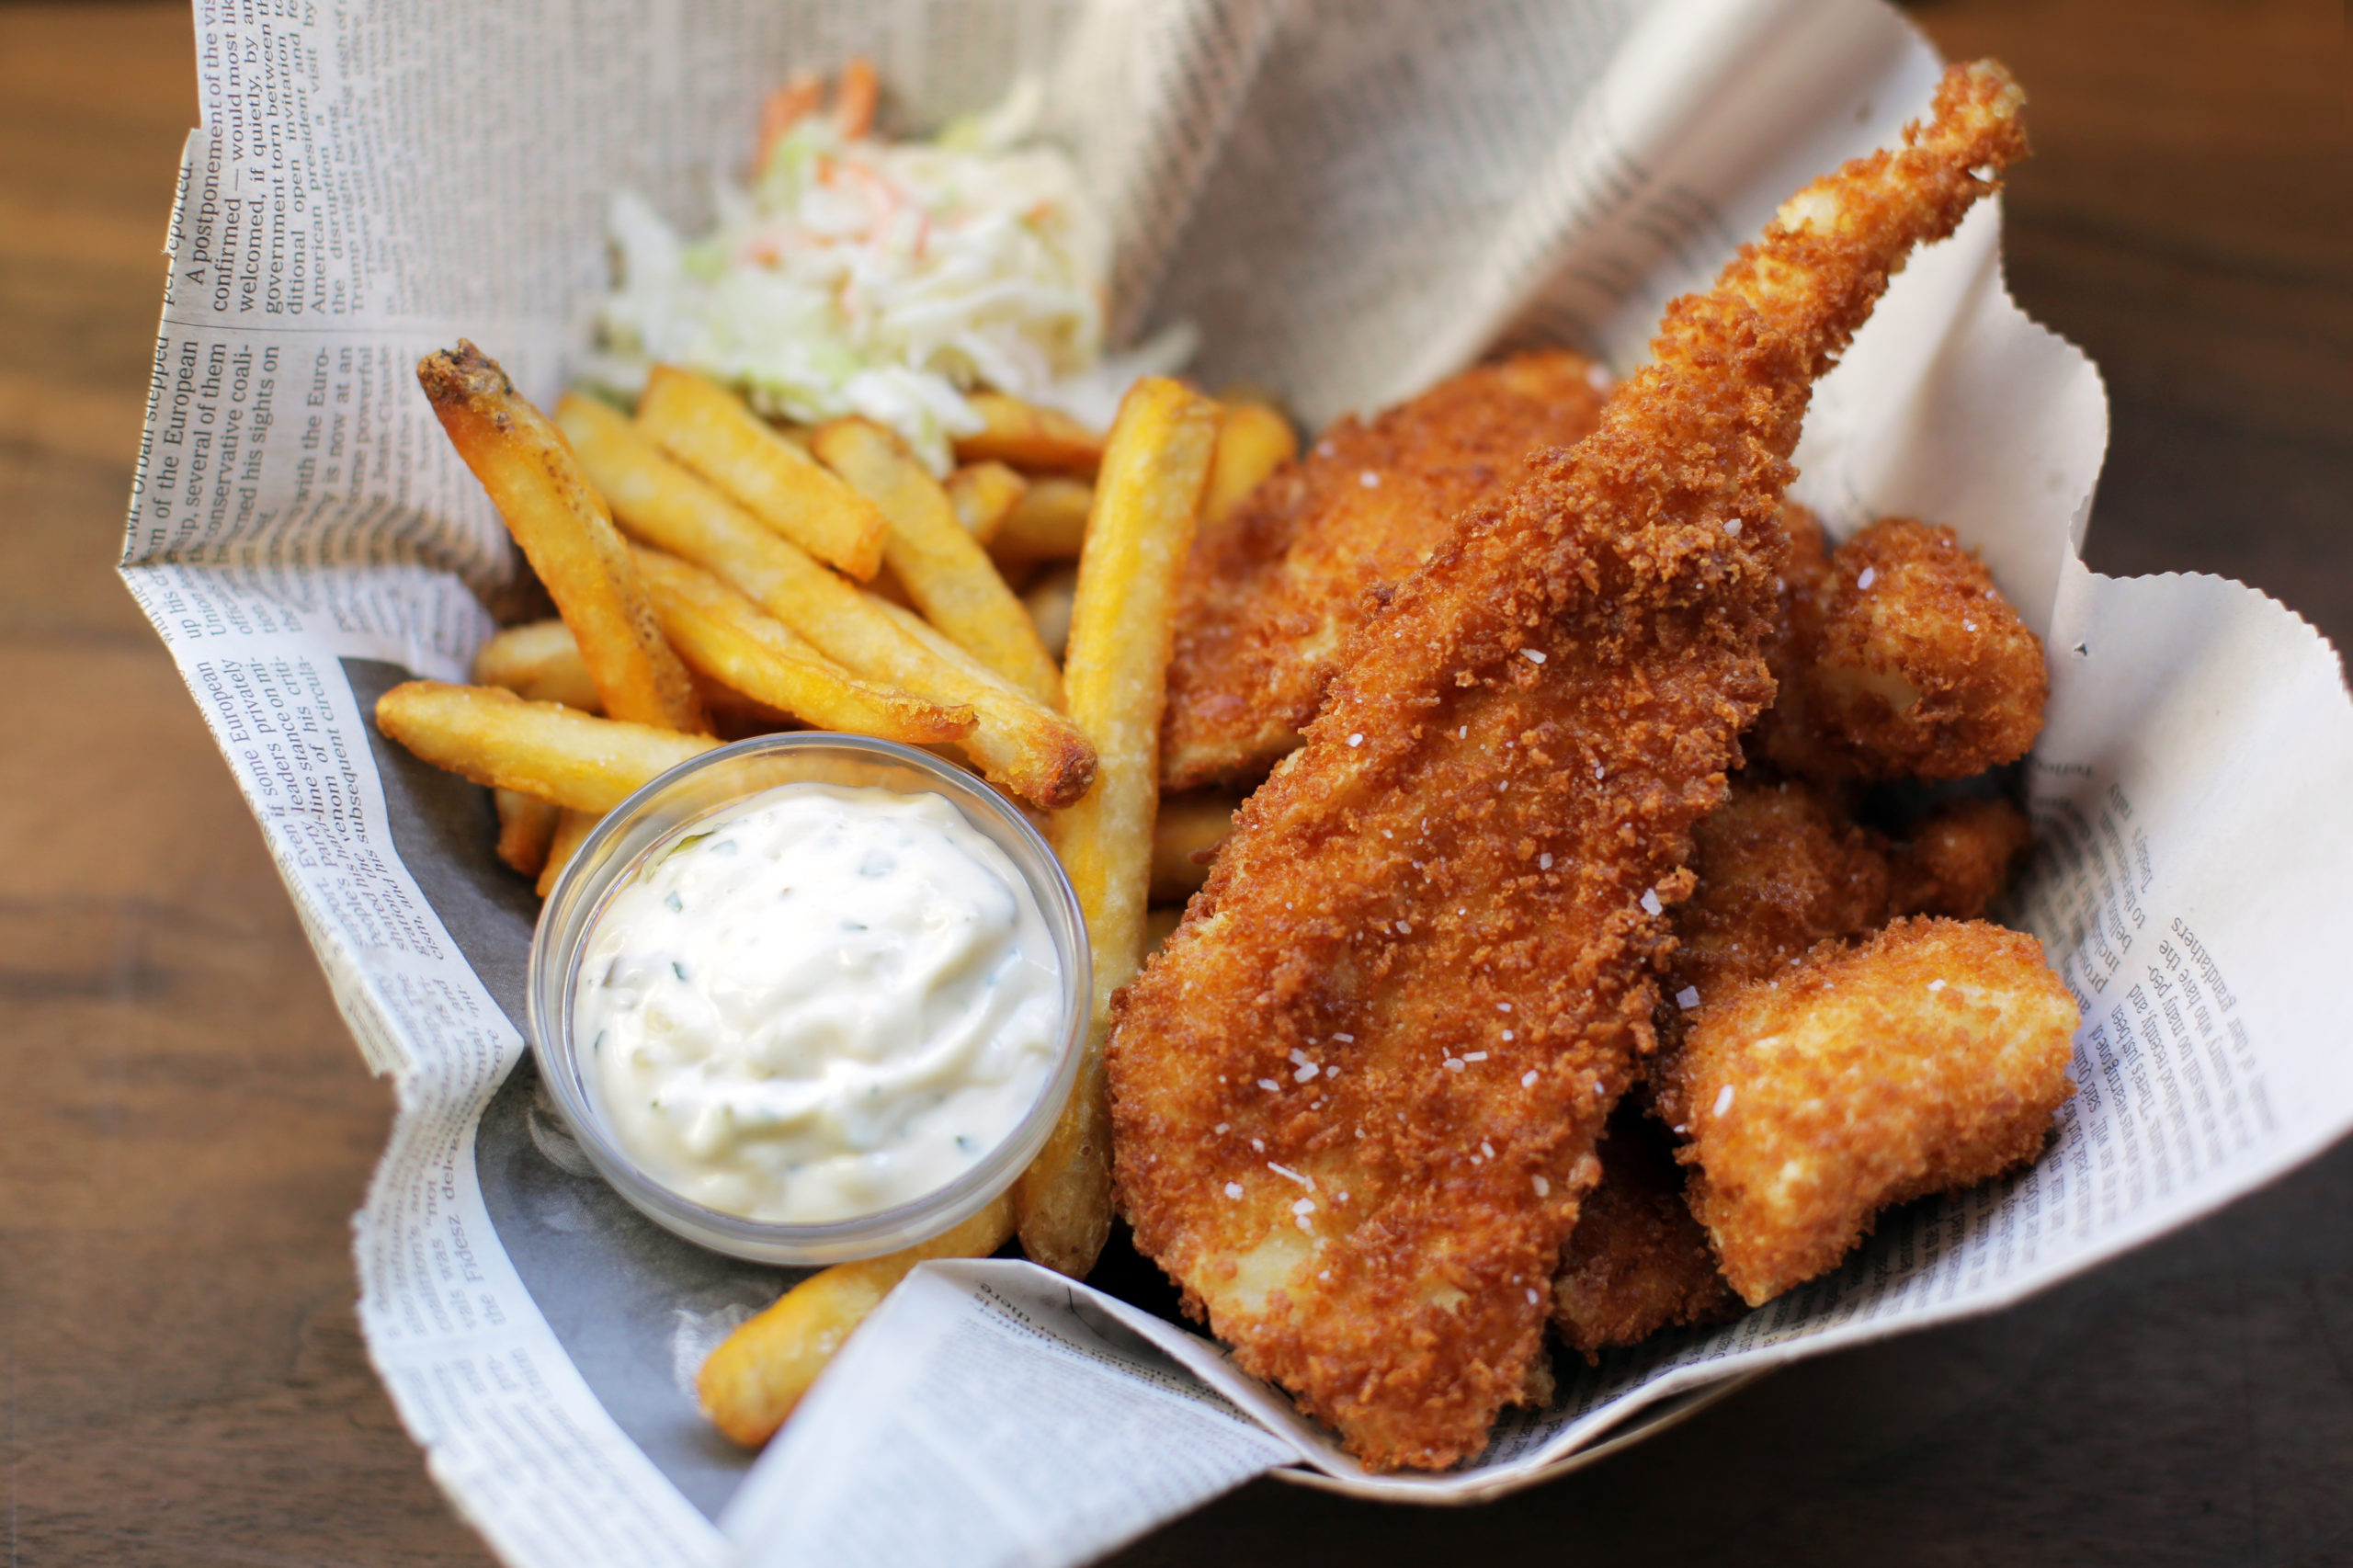 Fried Lake Fish with Tartar Sauce - Andrew Zimmern